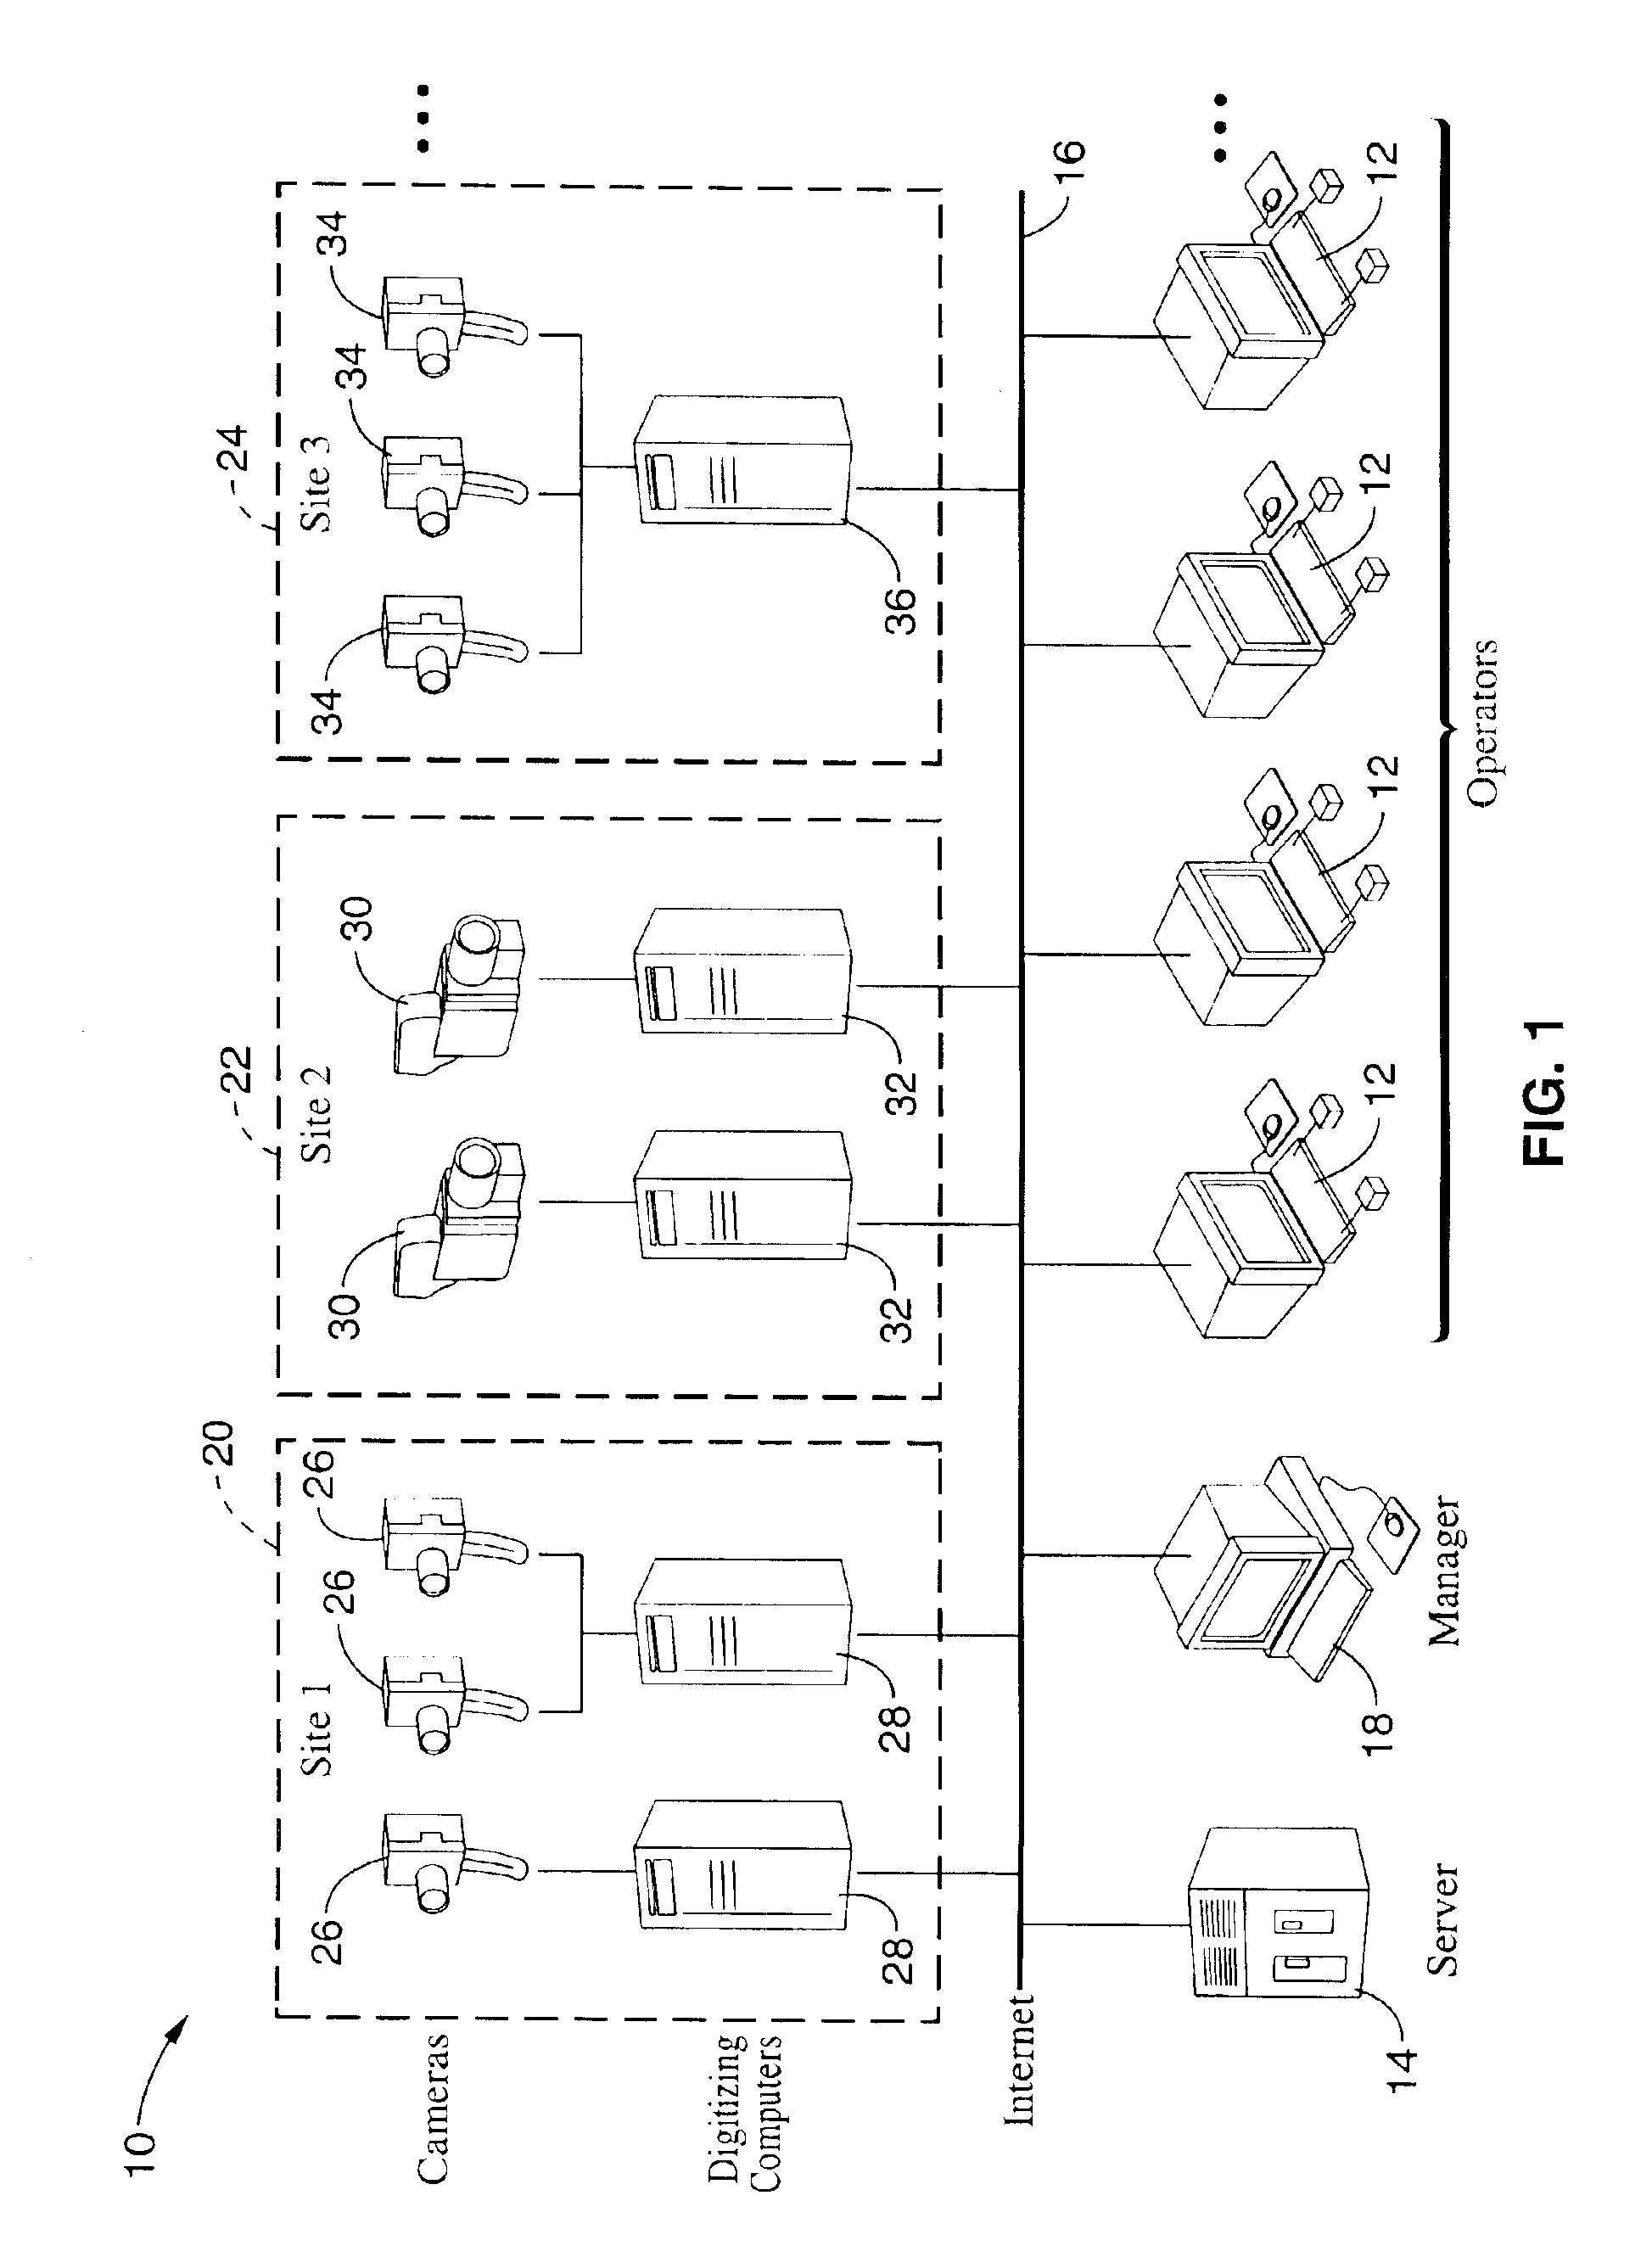 System and method for enhanced alertness and efficient distributed management for video surveillance